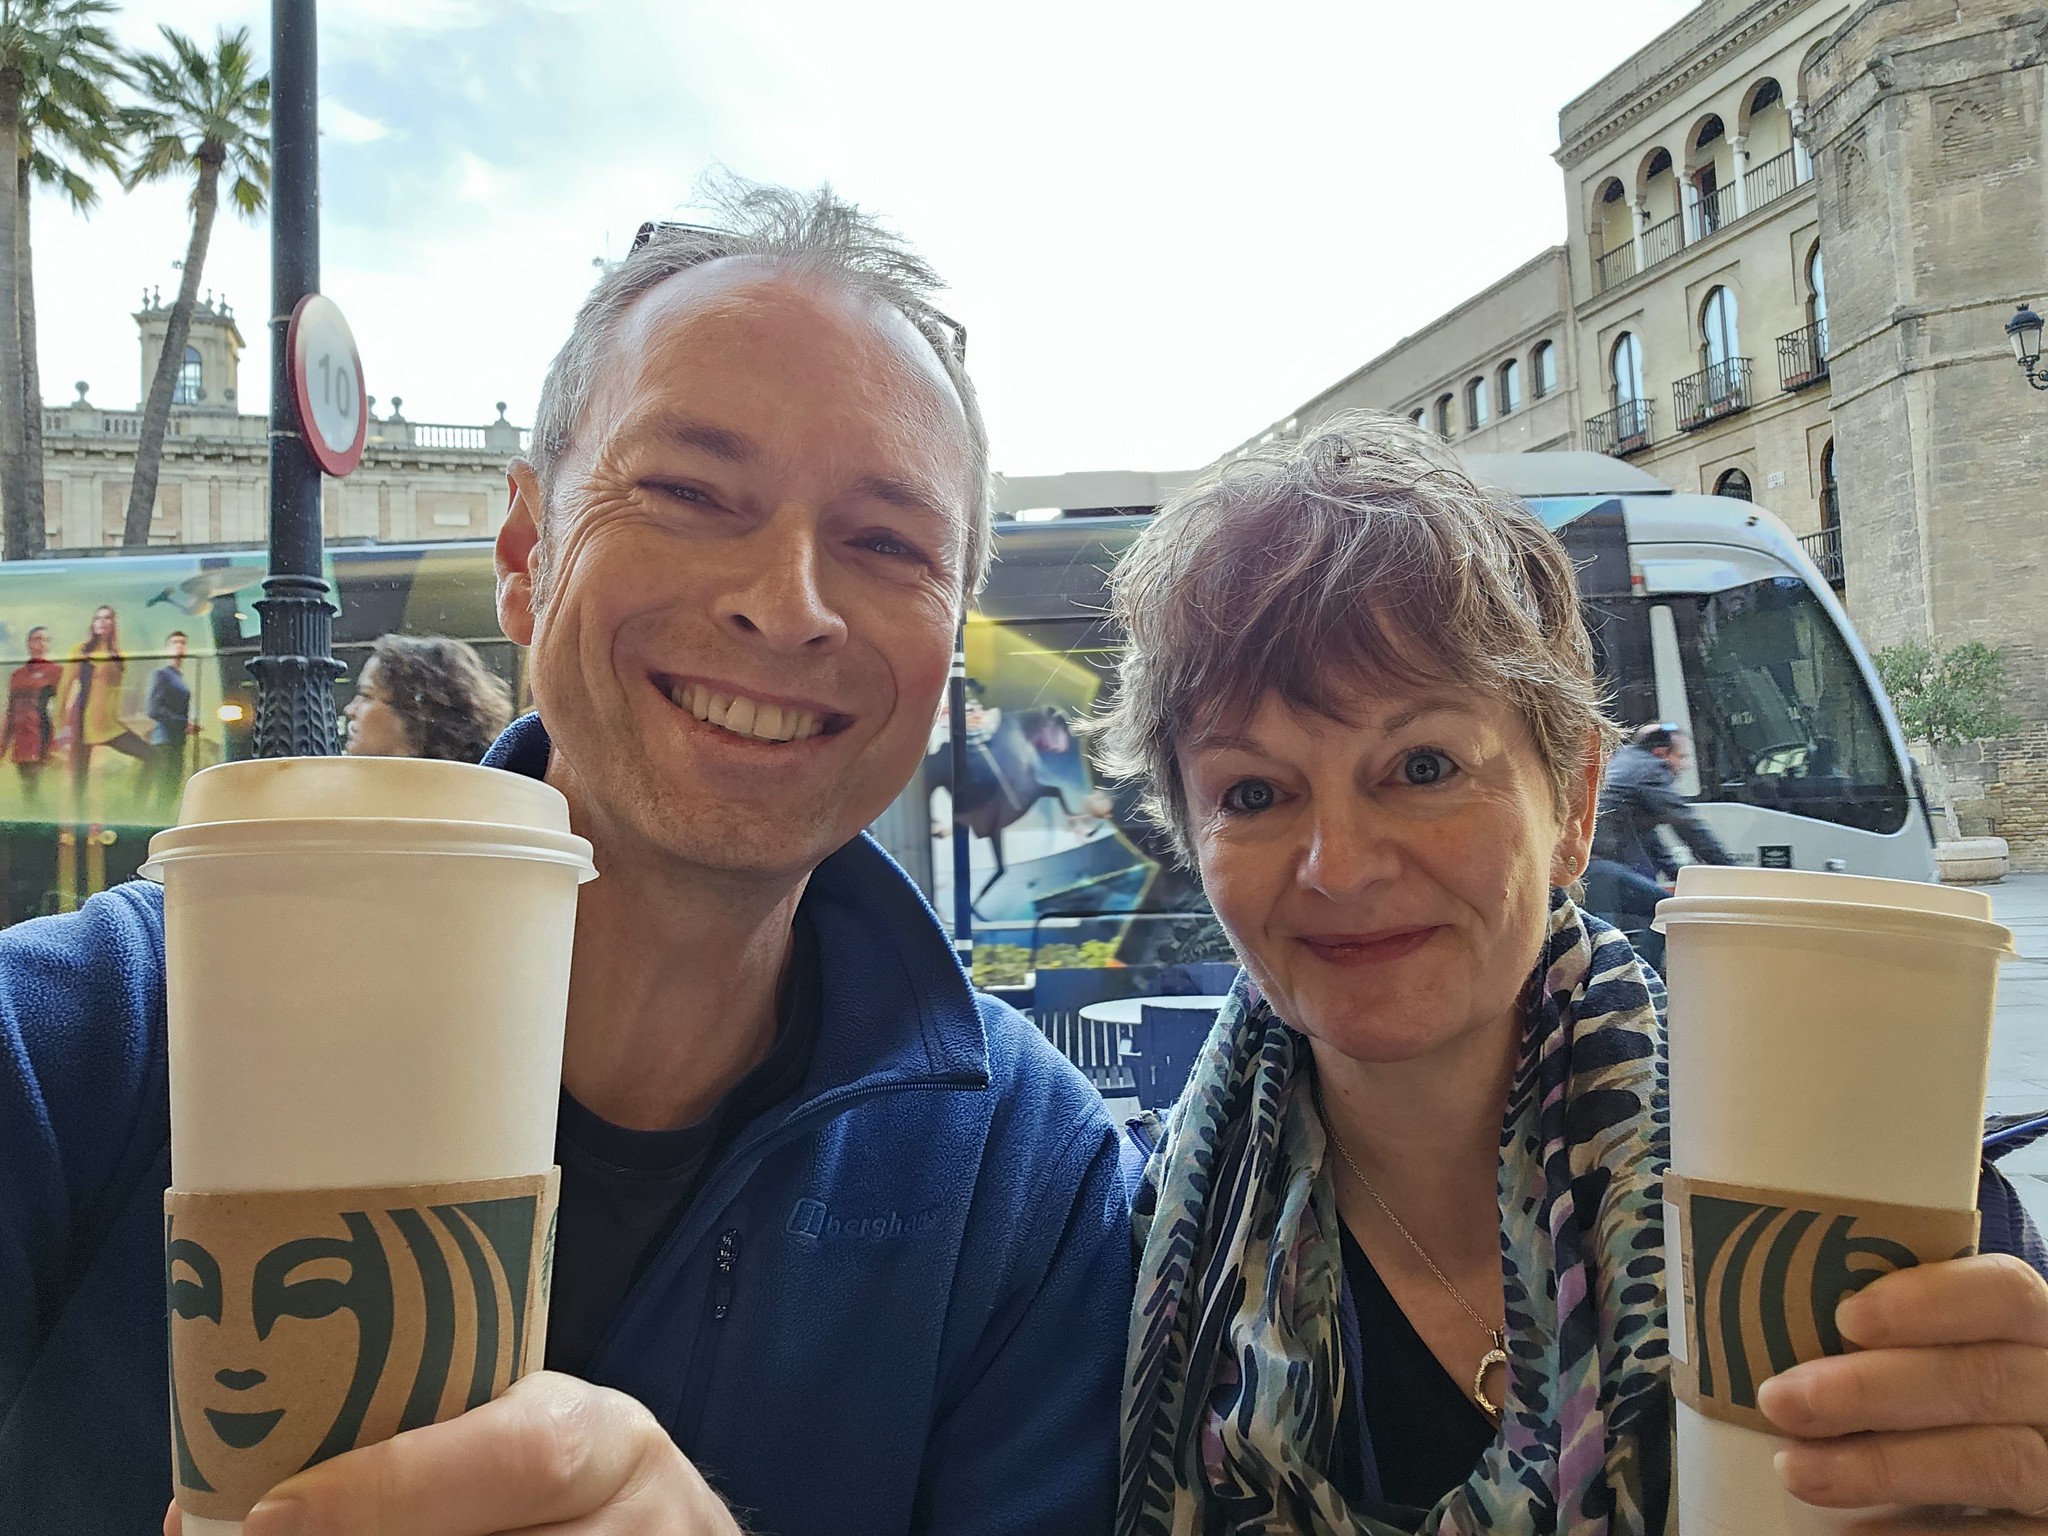 The Vickster and me at Starbucks in Seville